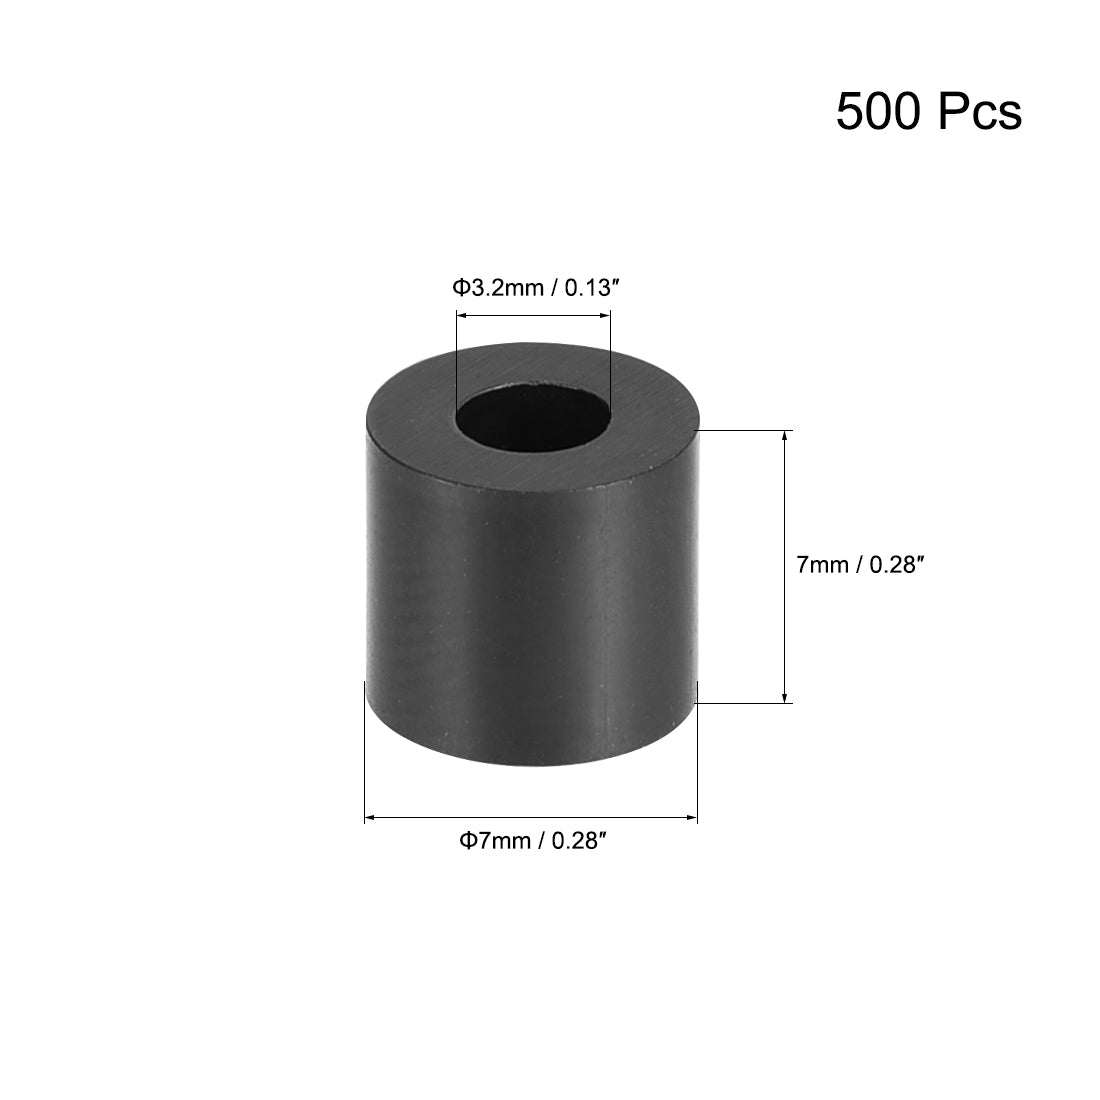 Uxcell Uxcell ABS Round Spacer Washer 5.4mm ID 9mm OD 5mm Height for M5 Screws Black 500Pcs